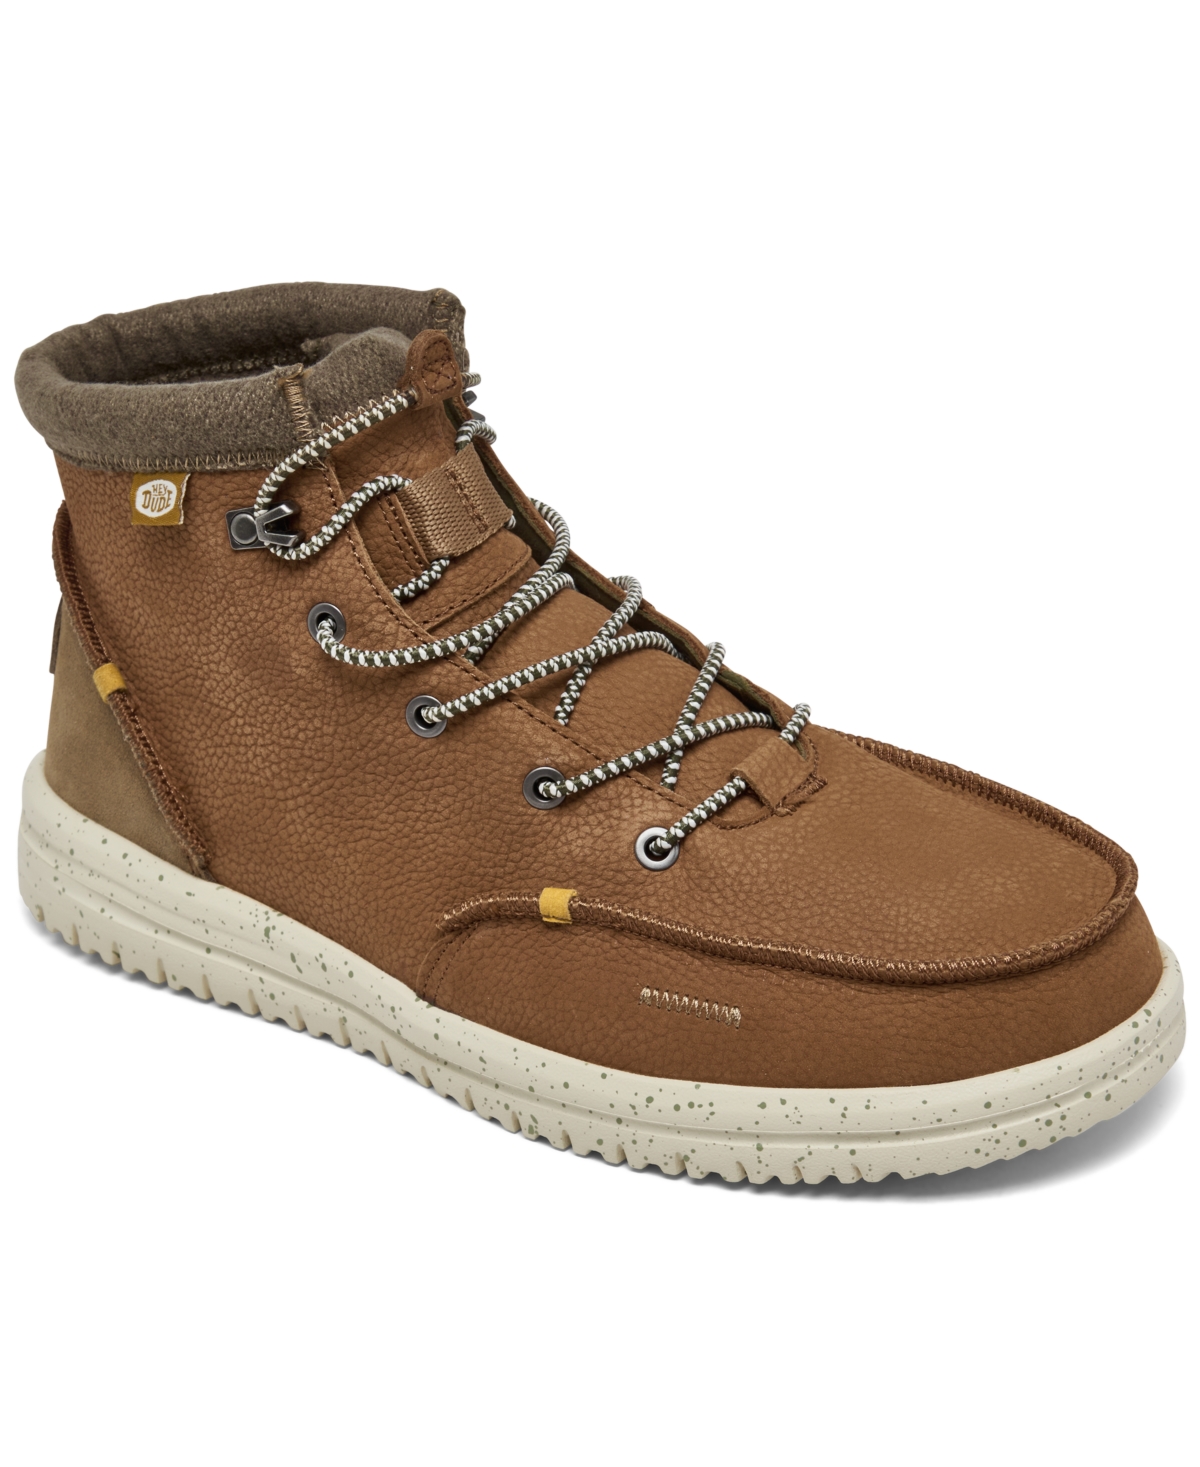 Men's Bradley Leather Casual Boots from Finish Line - Cognac